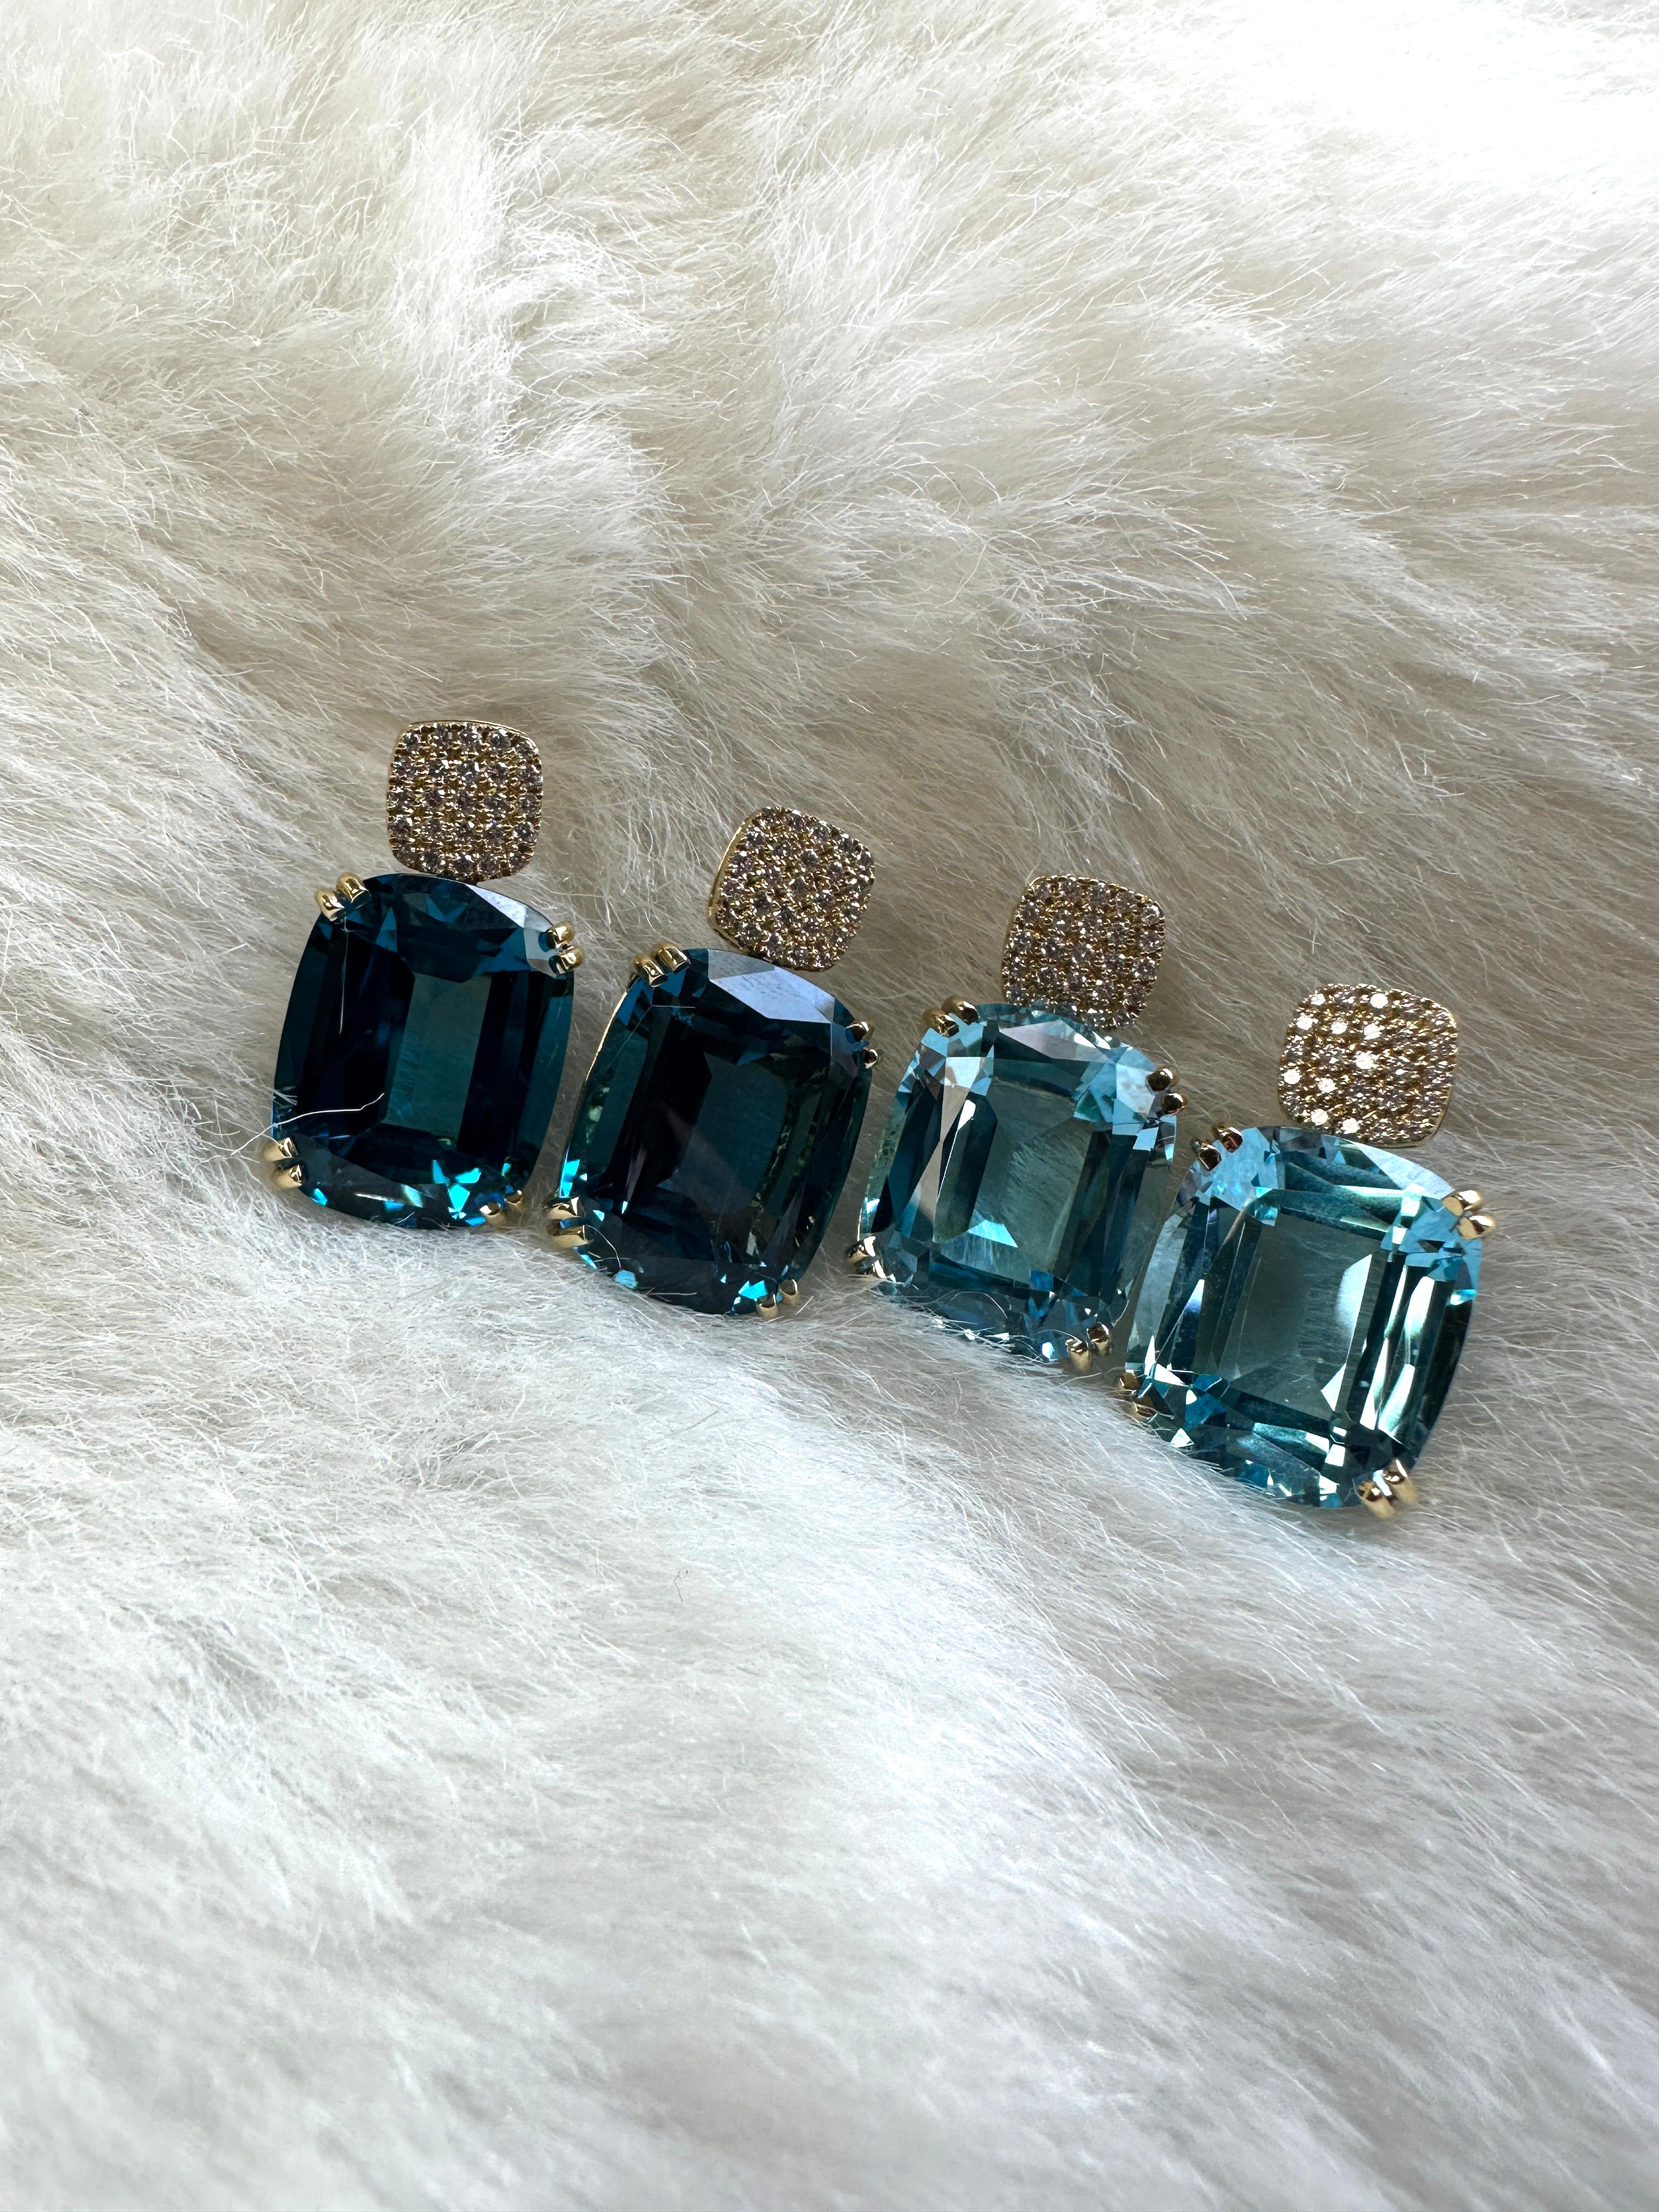 Introducing the stunning London Blue Topaz Cushion & Diamonds Earrings from our popular 'Gossip' Collection. 
The focal point of these earrings is the mesmerizing London Blue Topaz cushion-cut gemstone. The cushion-cut shape adds a touch of vintage